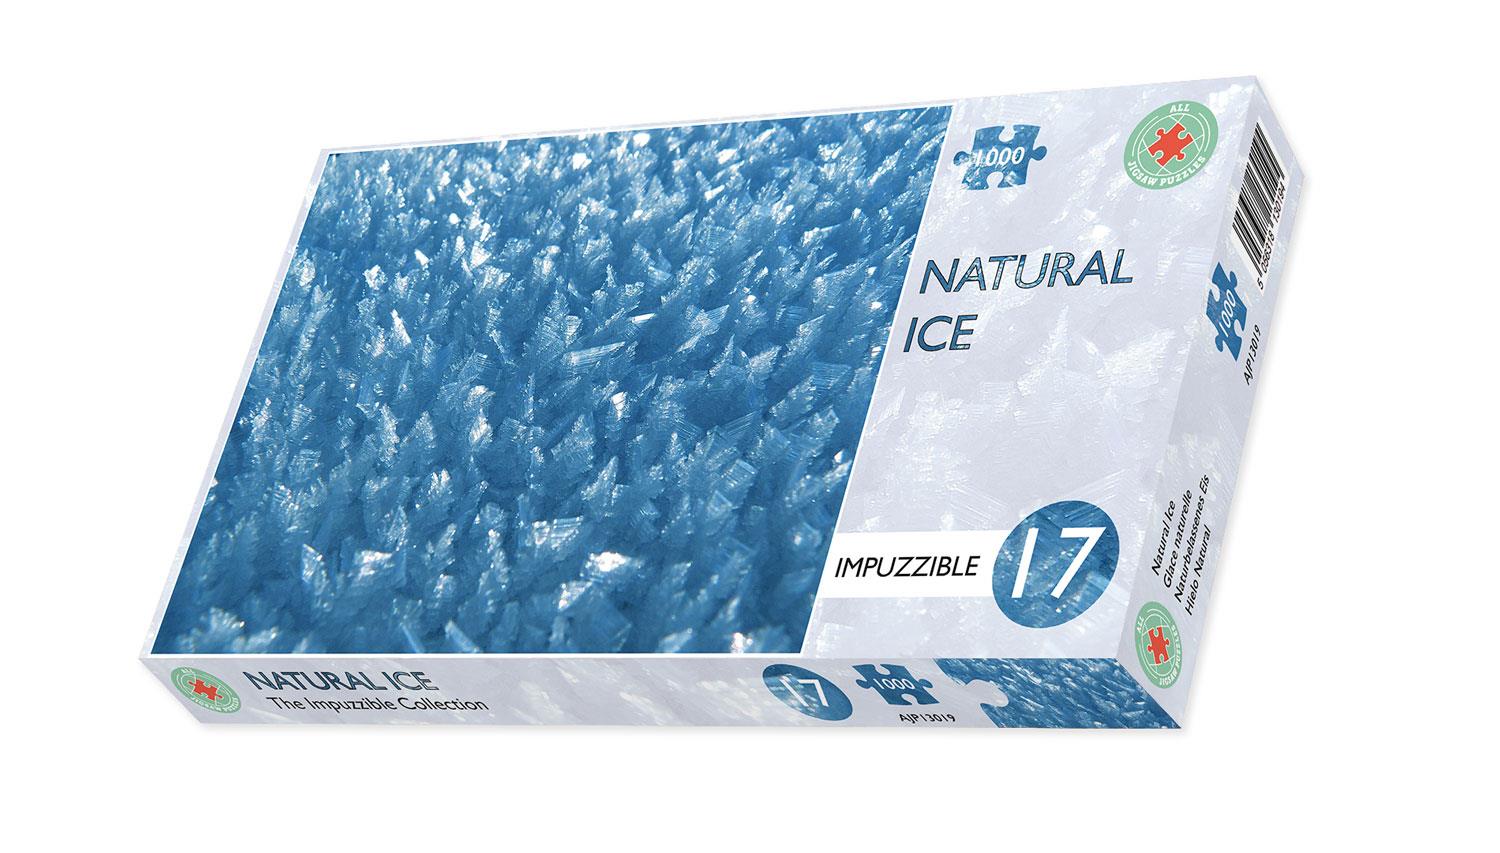 Natural Ice - Impuzzible No.17 - Jigsaw Puzzle (1000 Pieces)